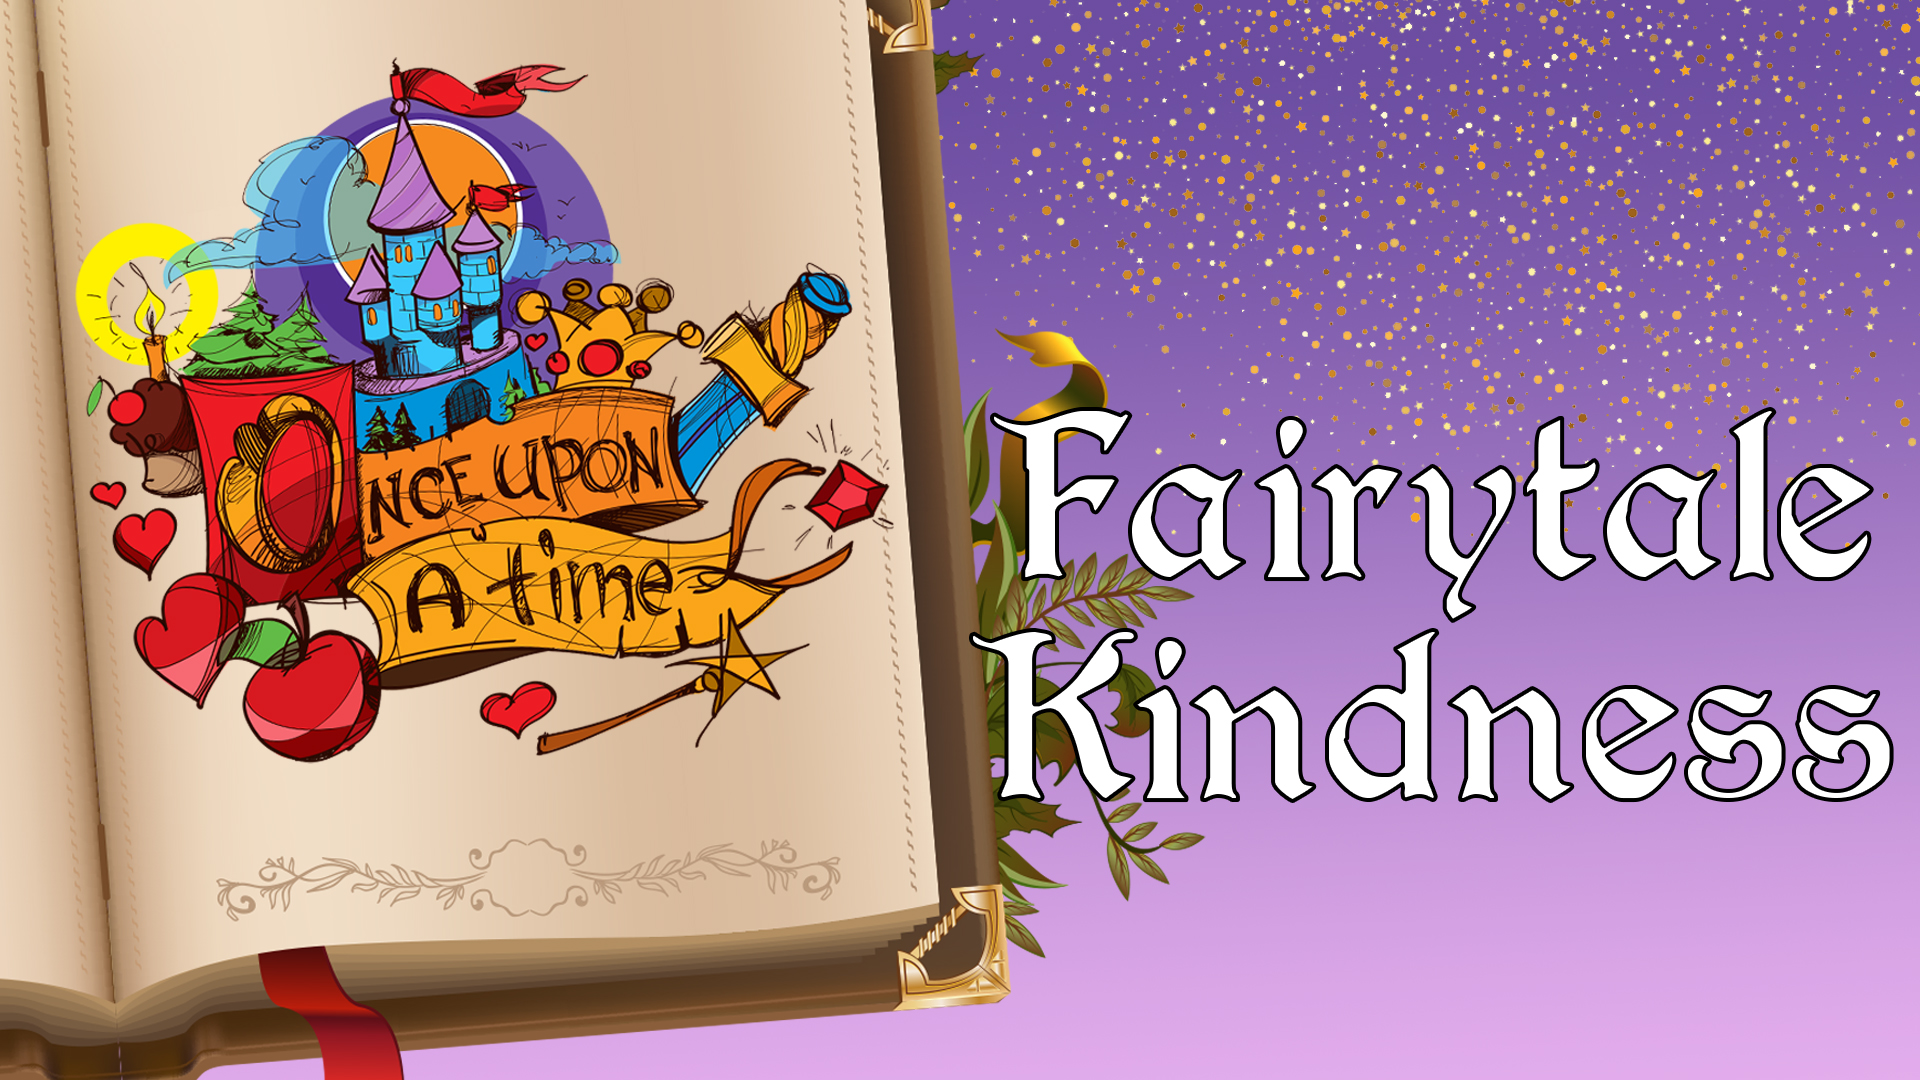 Image reads "Fairytale Kindness" against a purple gradient background. There is an old book to the left of the title with a page that reads "Once Upon a Time".